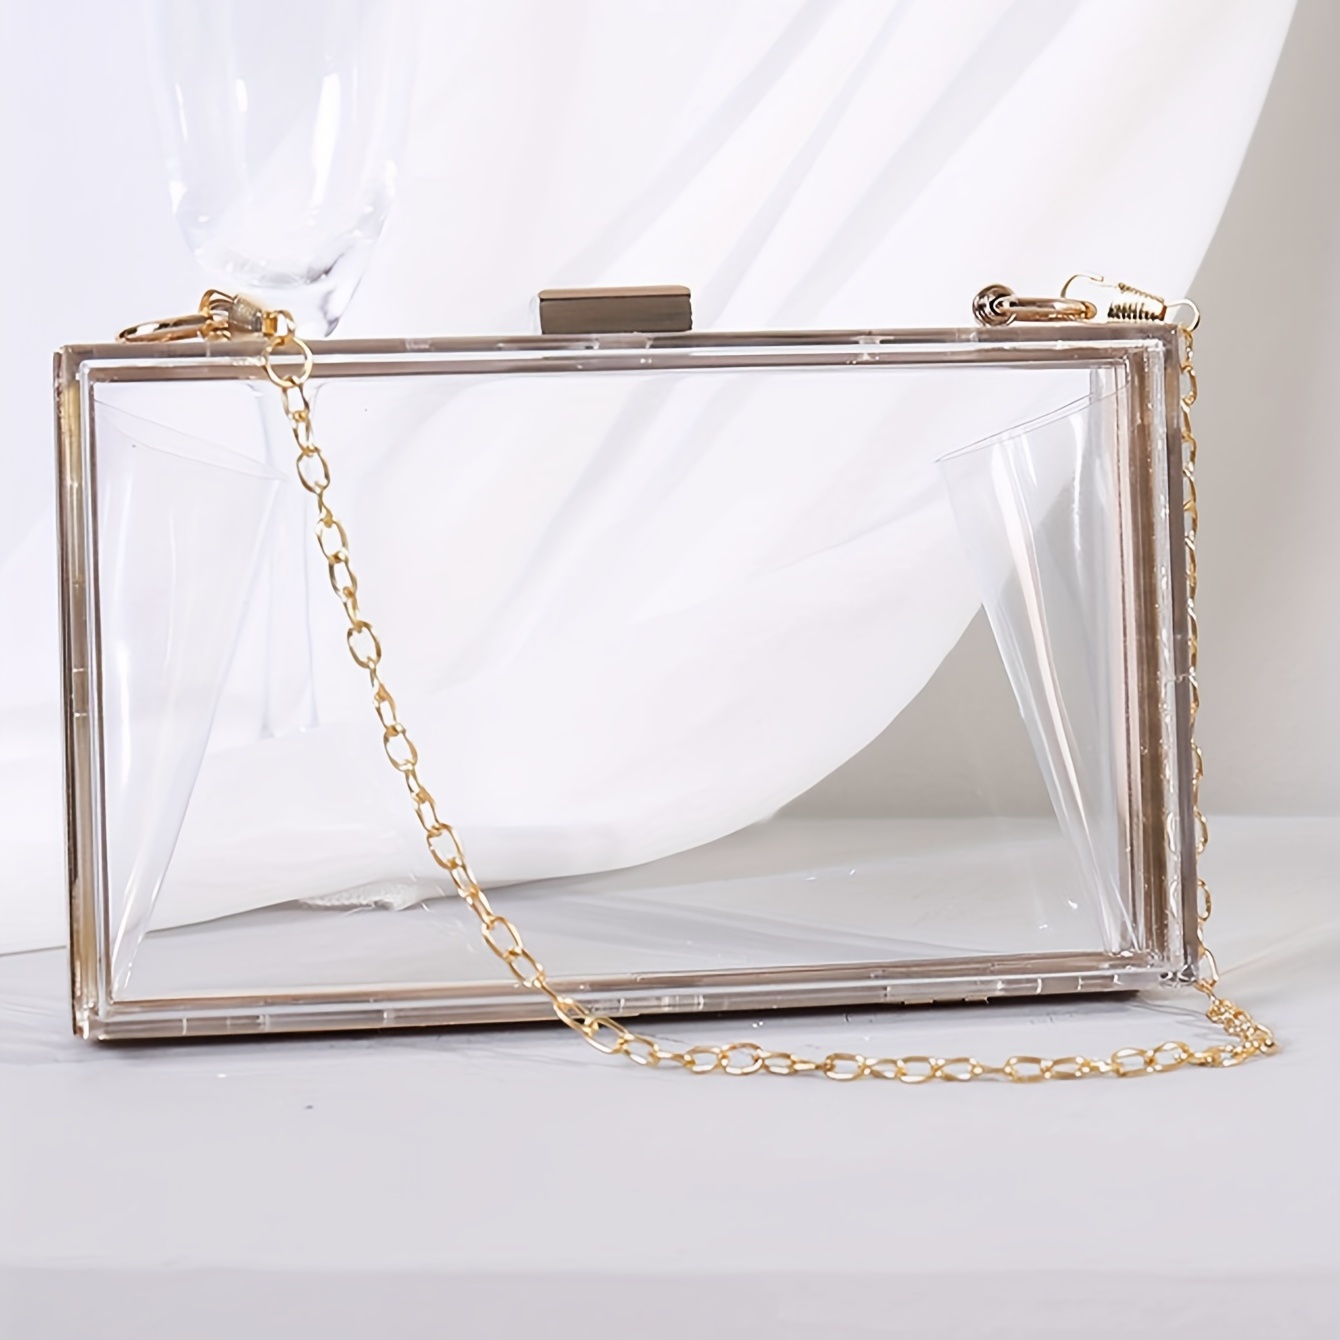 Mini Clear Square Acrylic Bag, All-match Clutch Evening Bag With